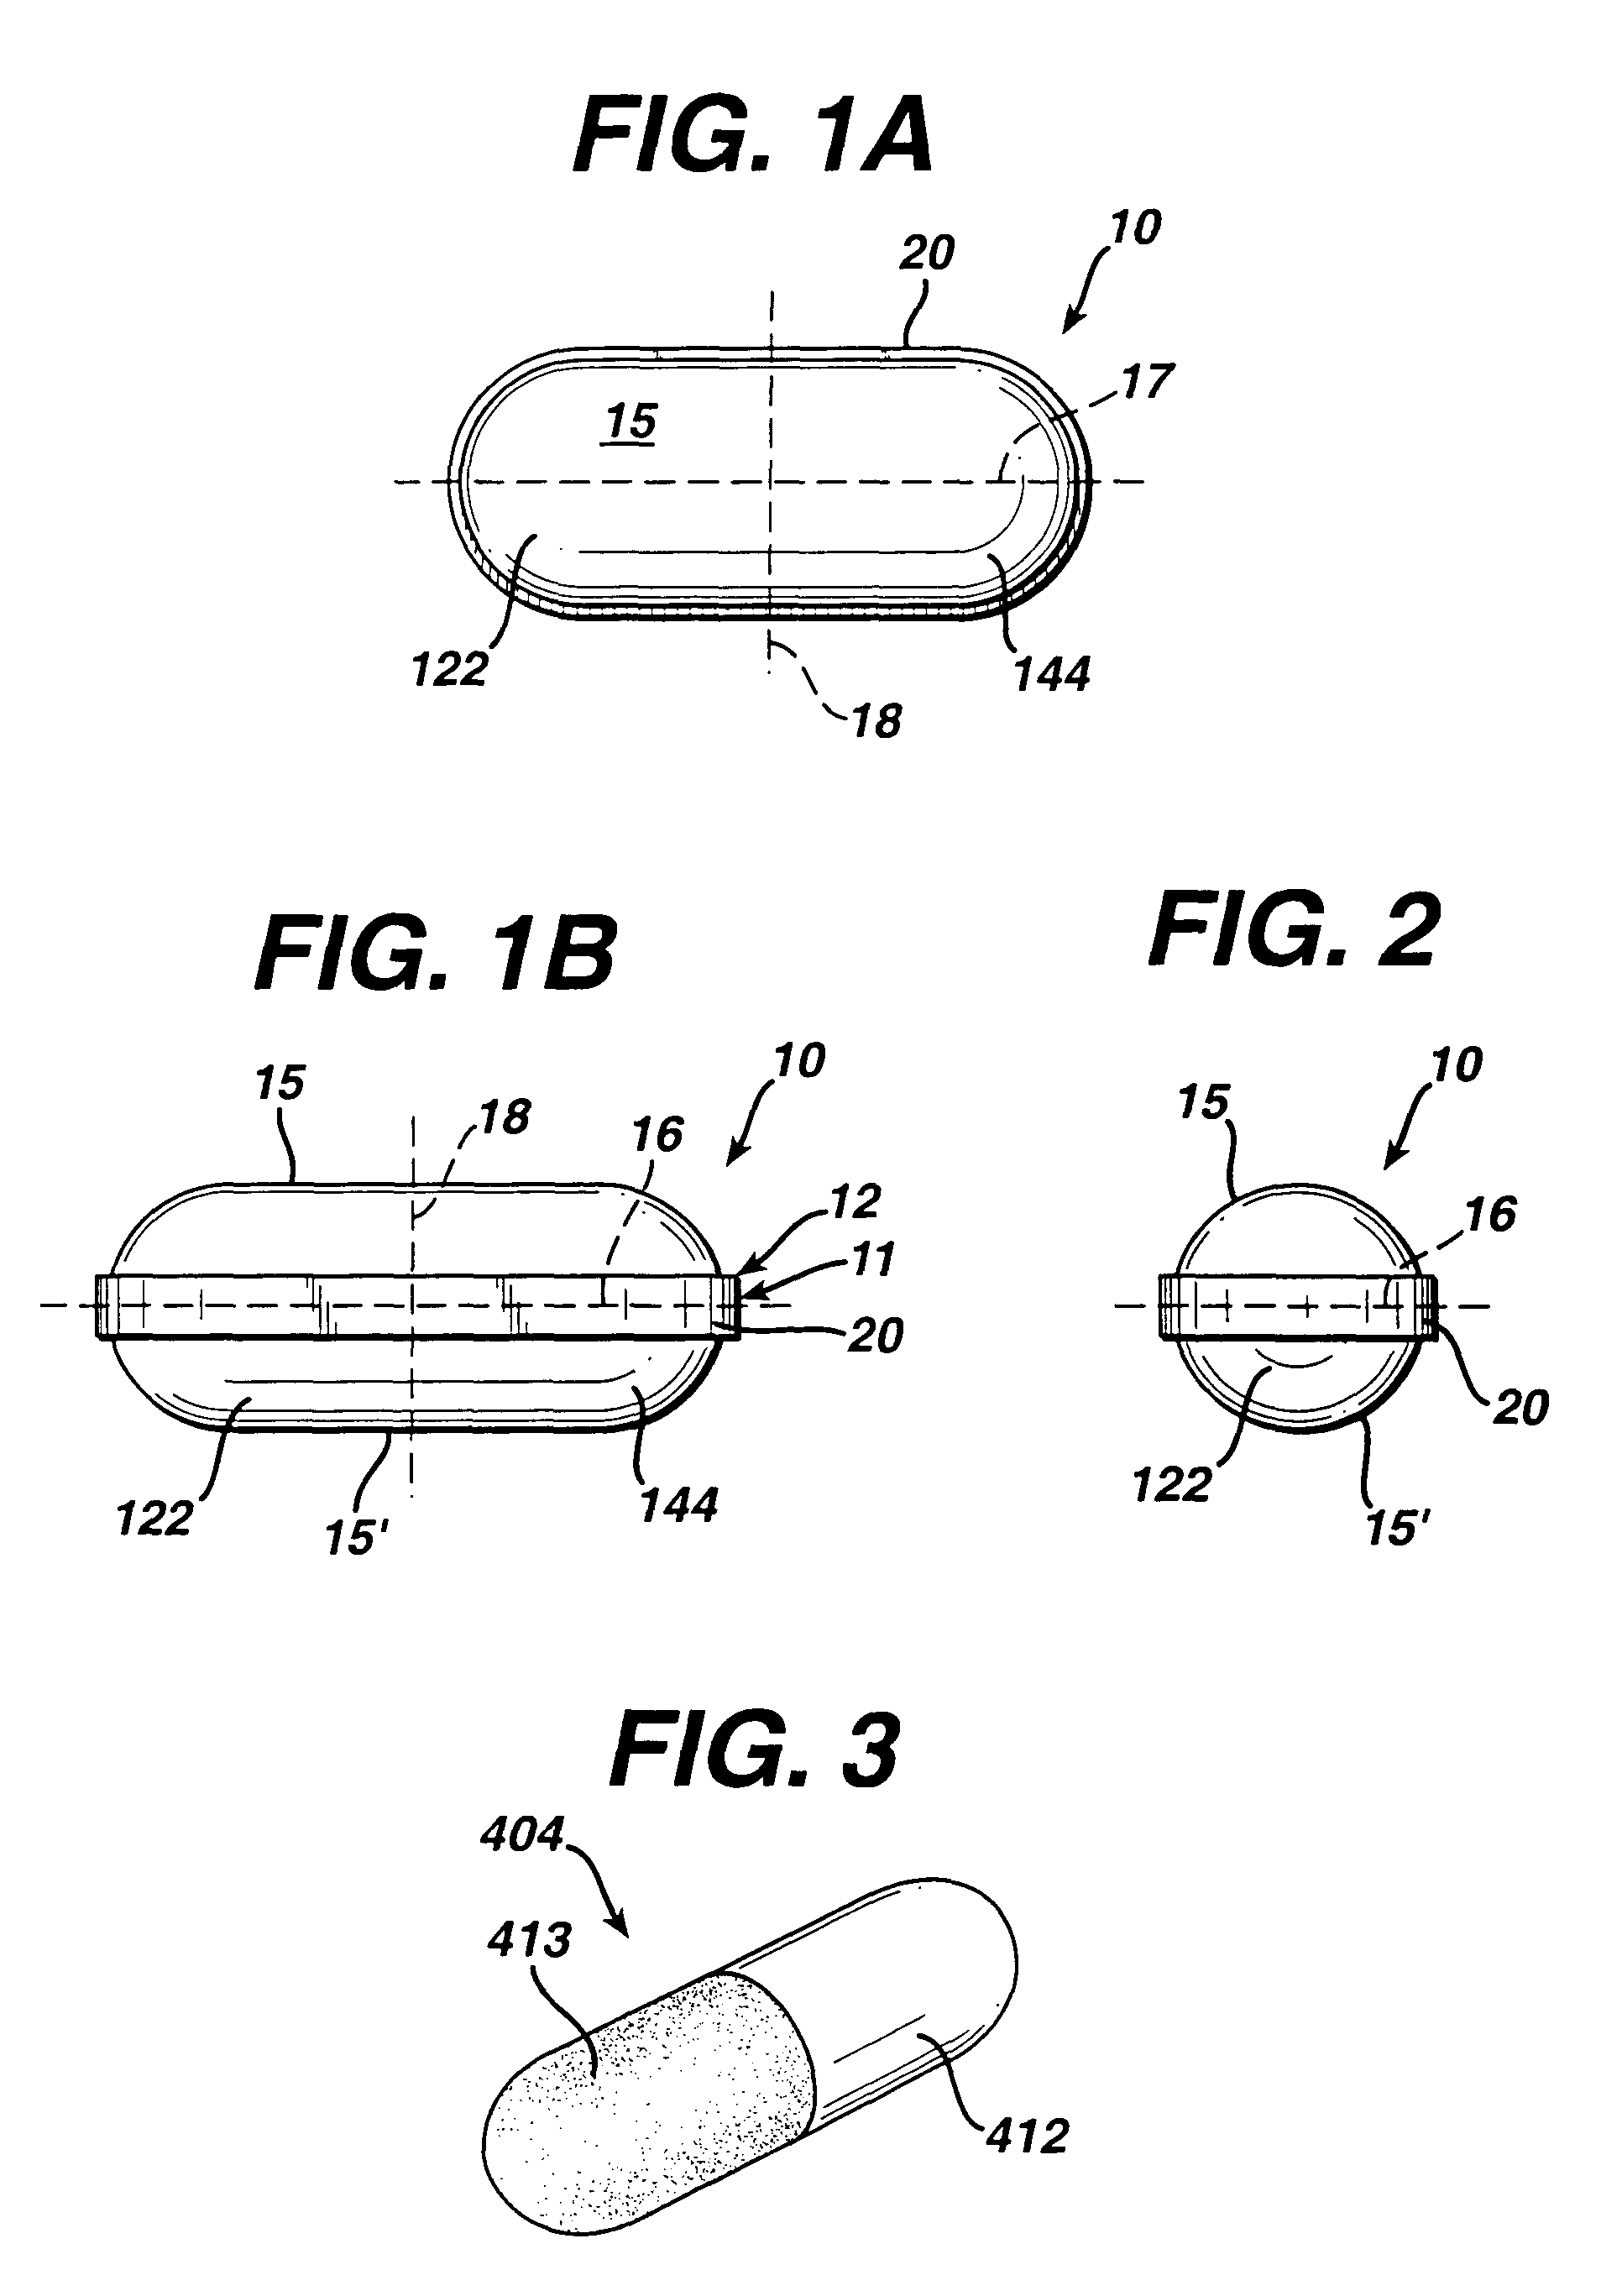 Film forming compositions containing sucralose